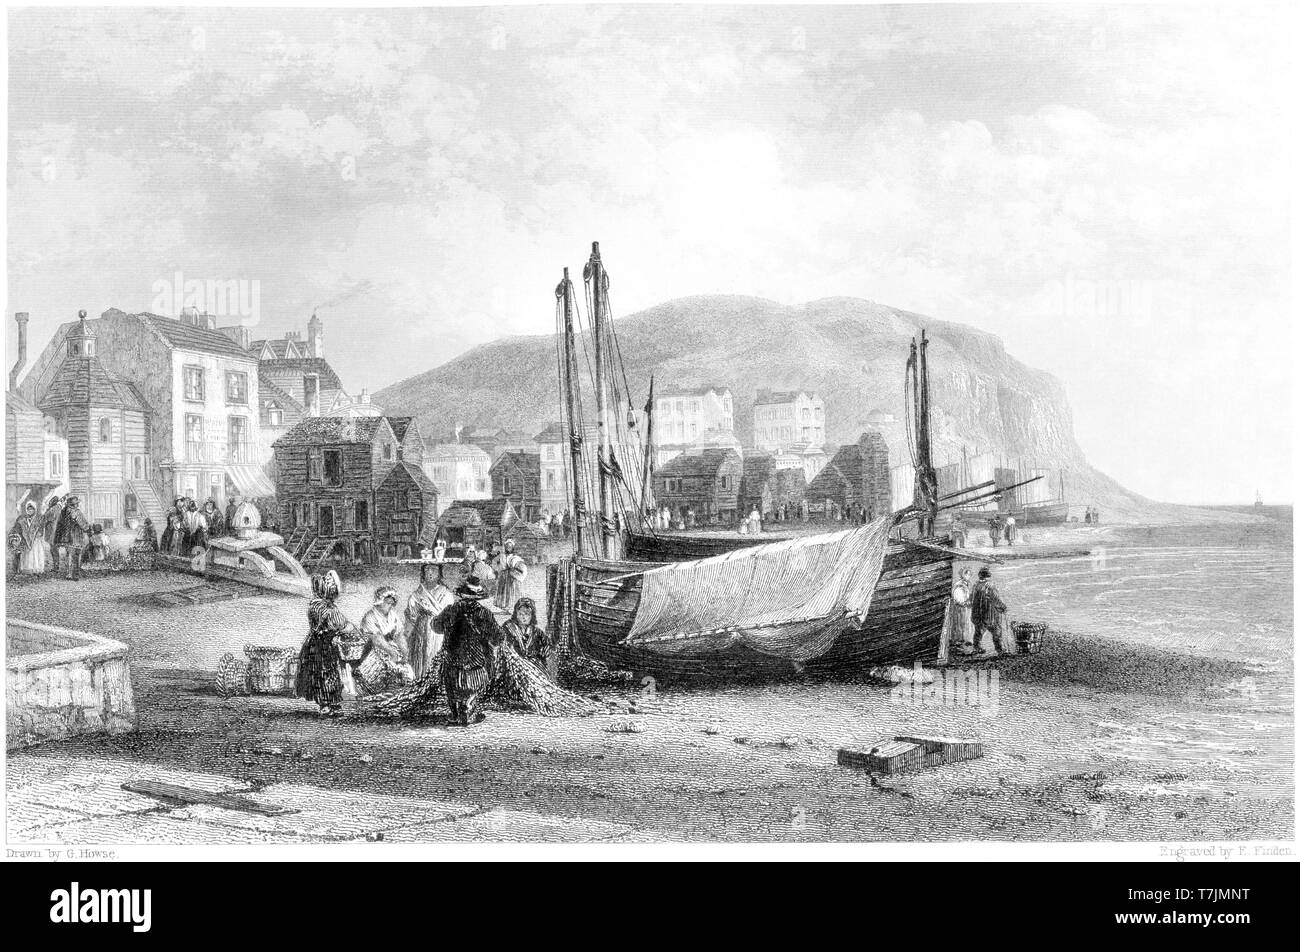 An engraving of Hastings - View on the Beach scanned at high resolution from a book published in 1842.  Believed copyright free. Stock Photo